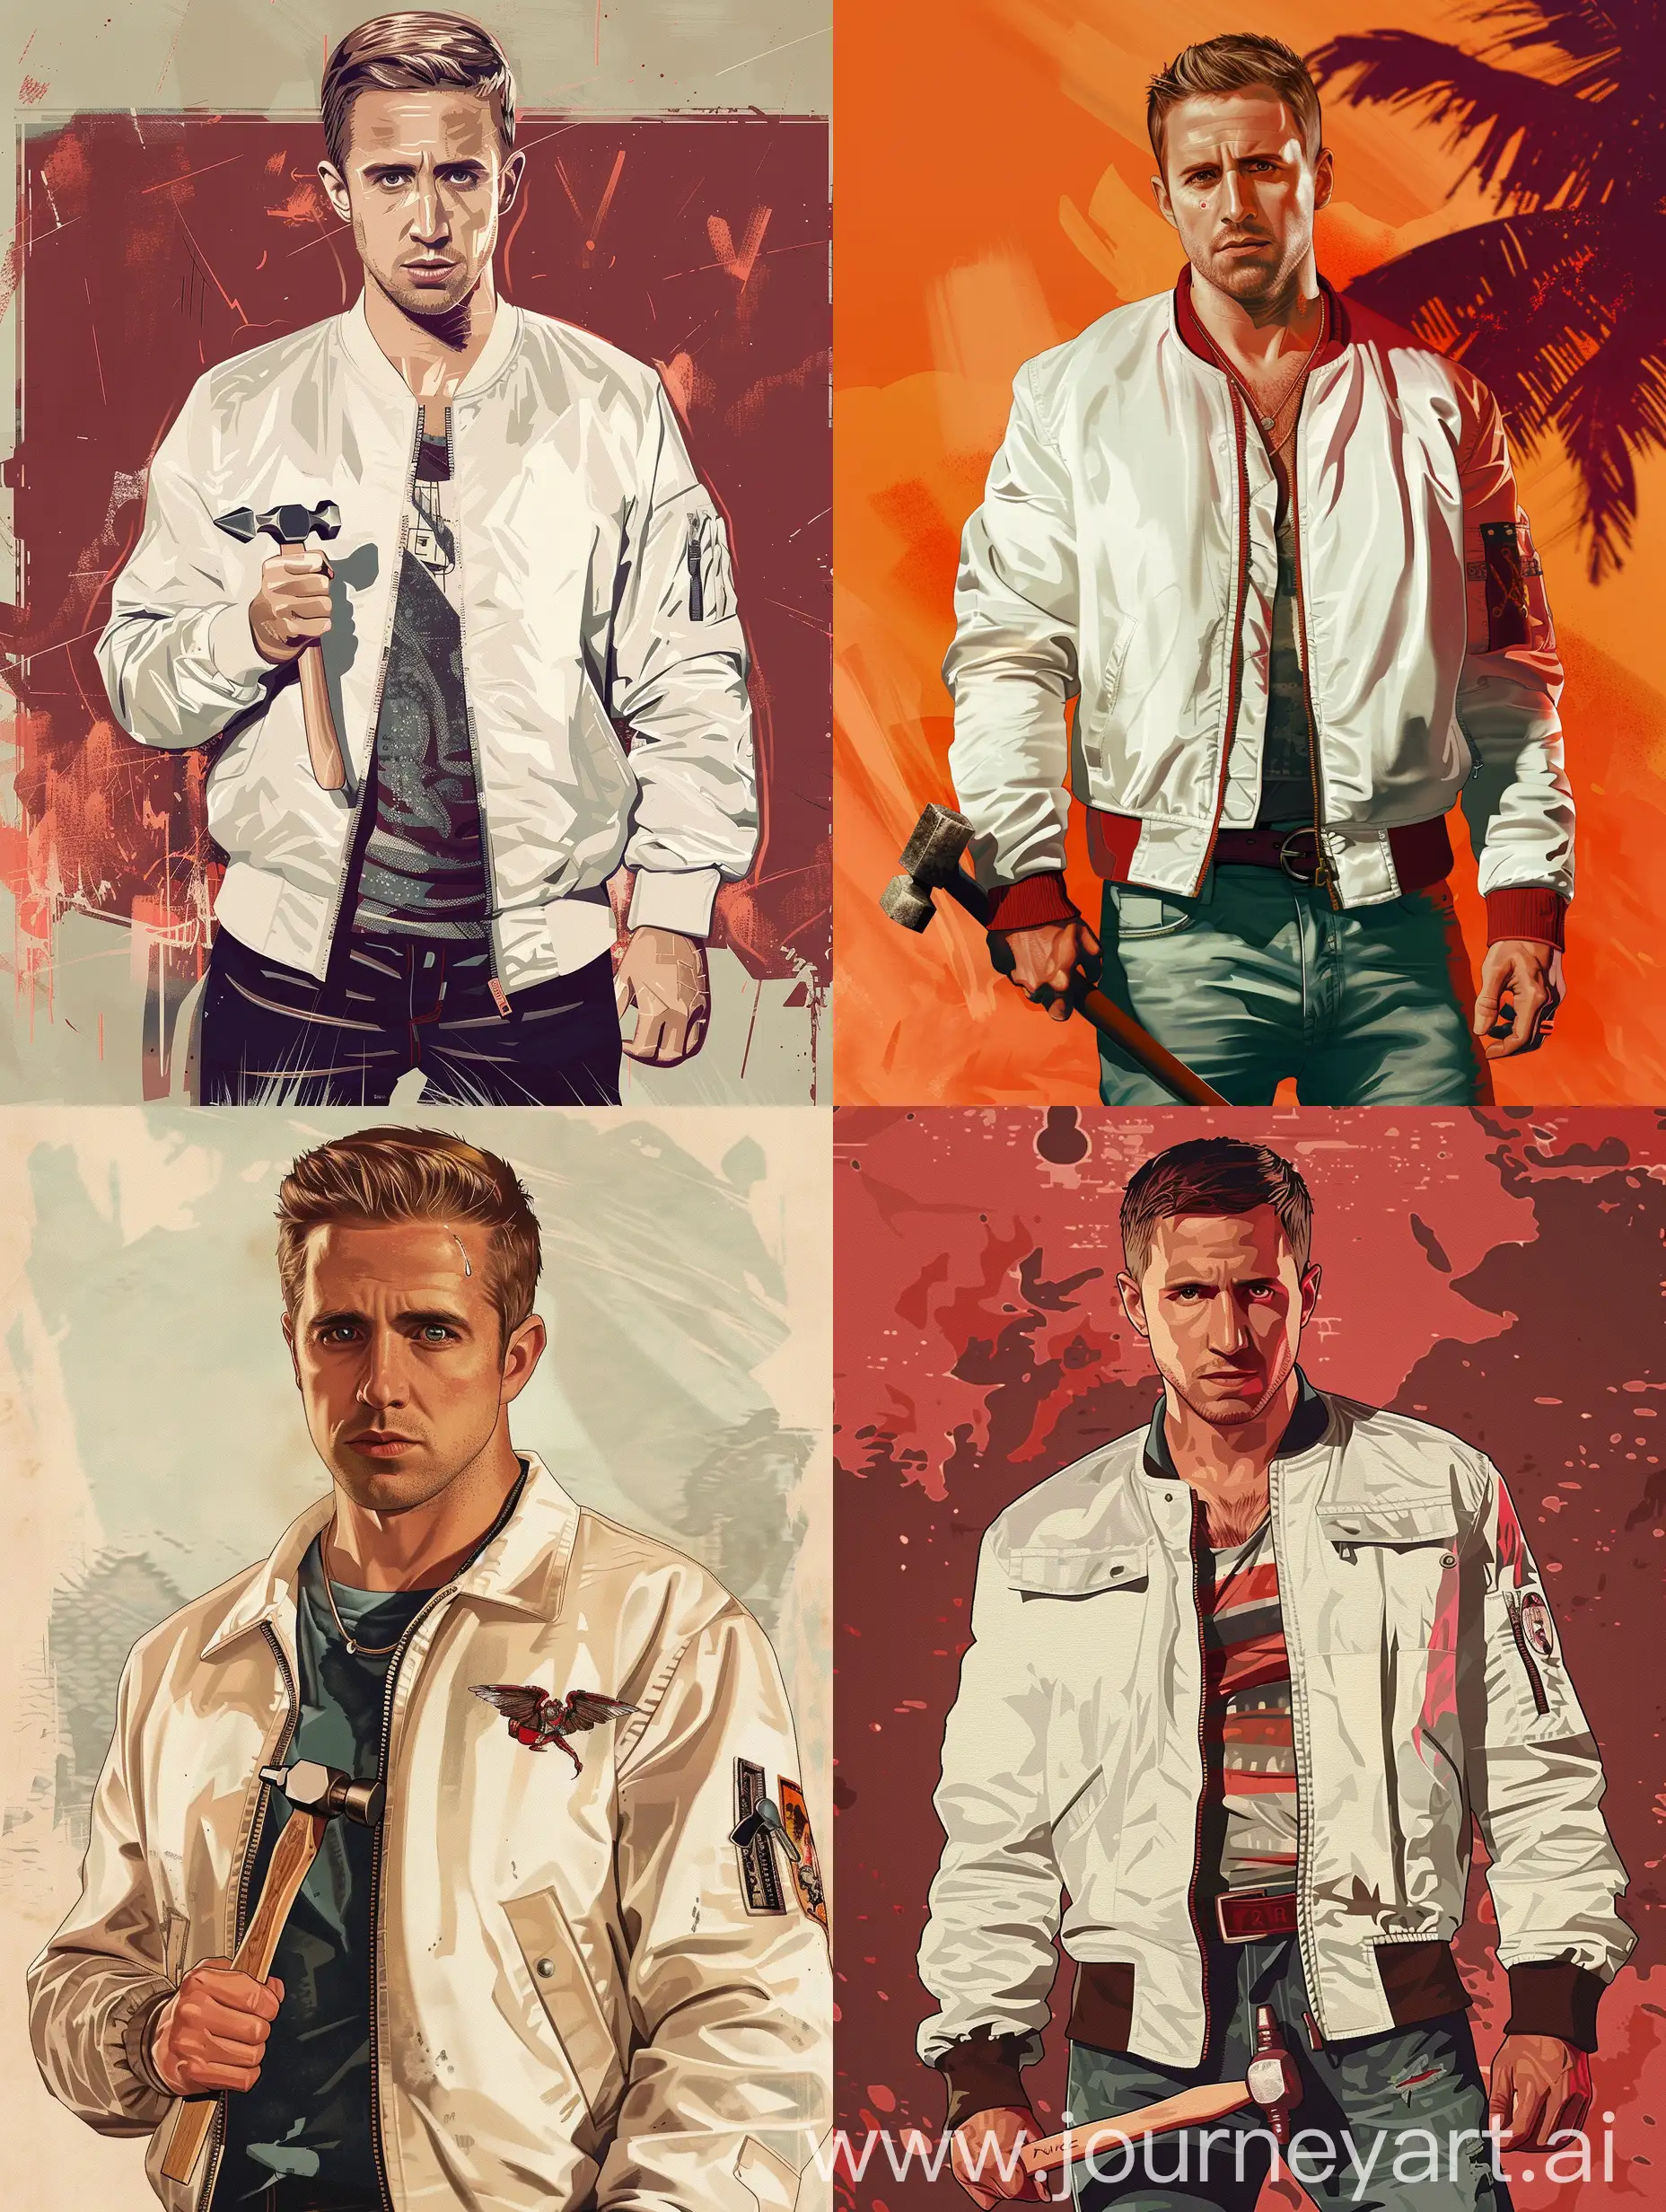 A poster in the style of GTA 4. Ryan Gosling from the movie drive, with a small hammer. in a white bomber jacket from the movie drive. The art is stylized as in the download of the GTA 4. 8K ultrarealism game.